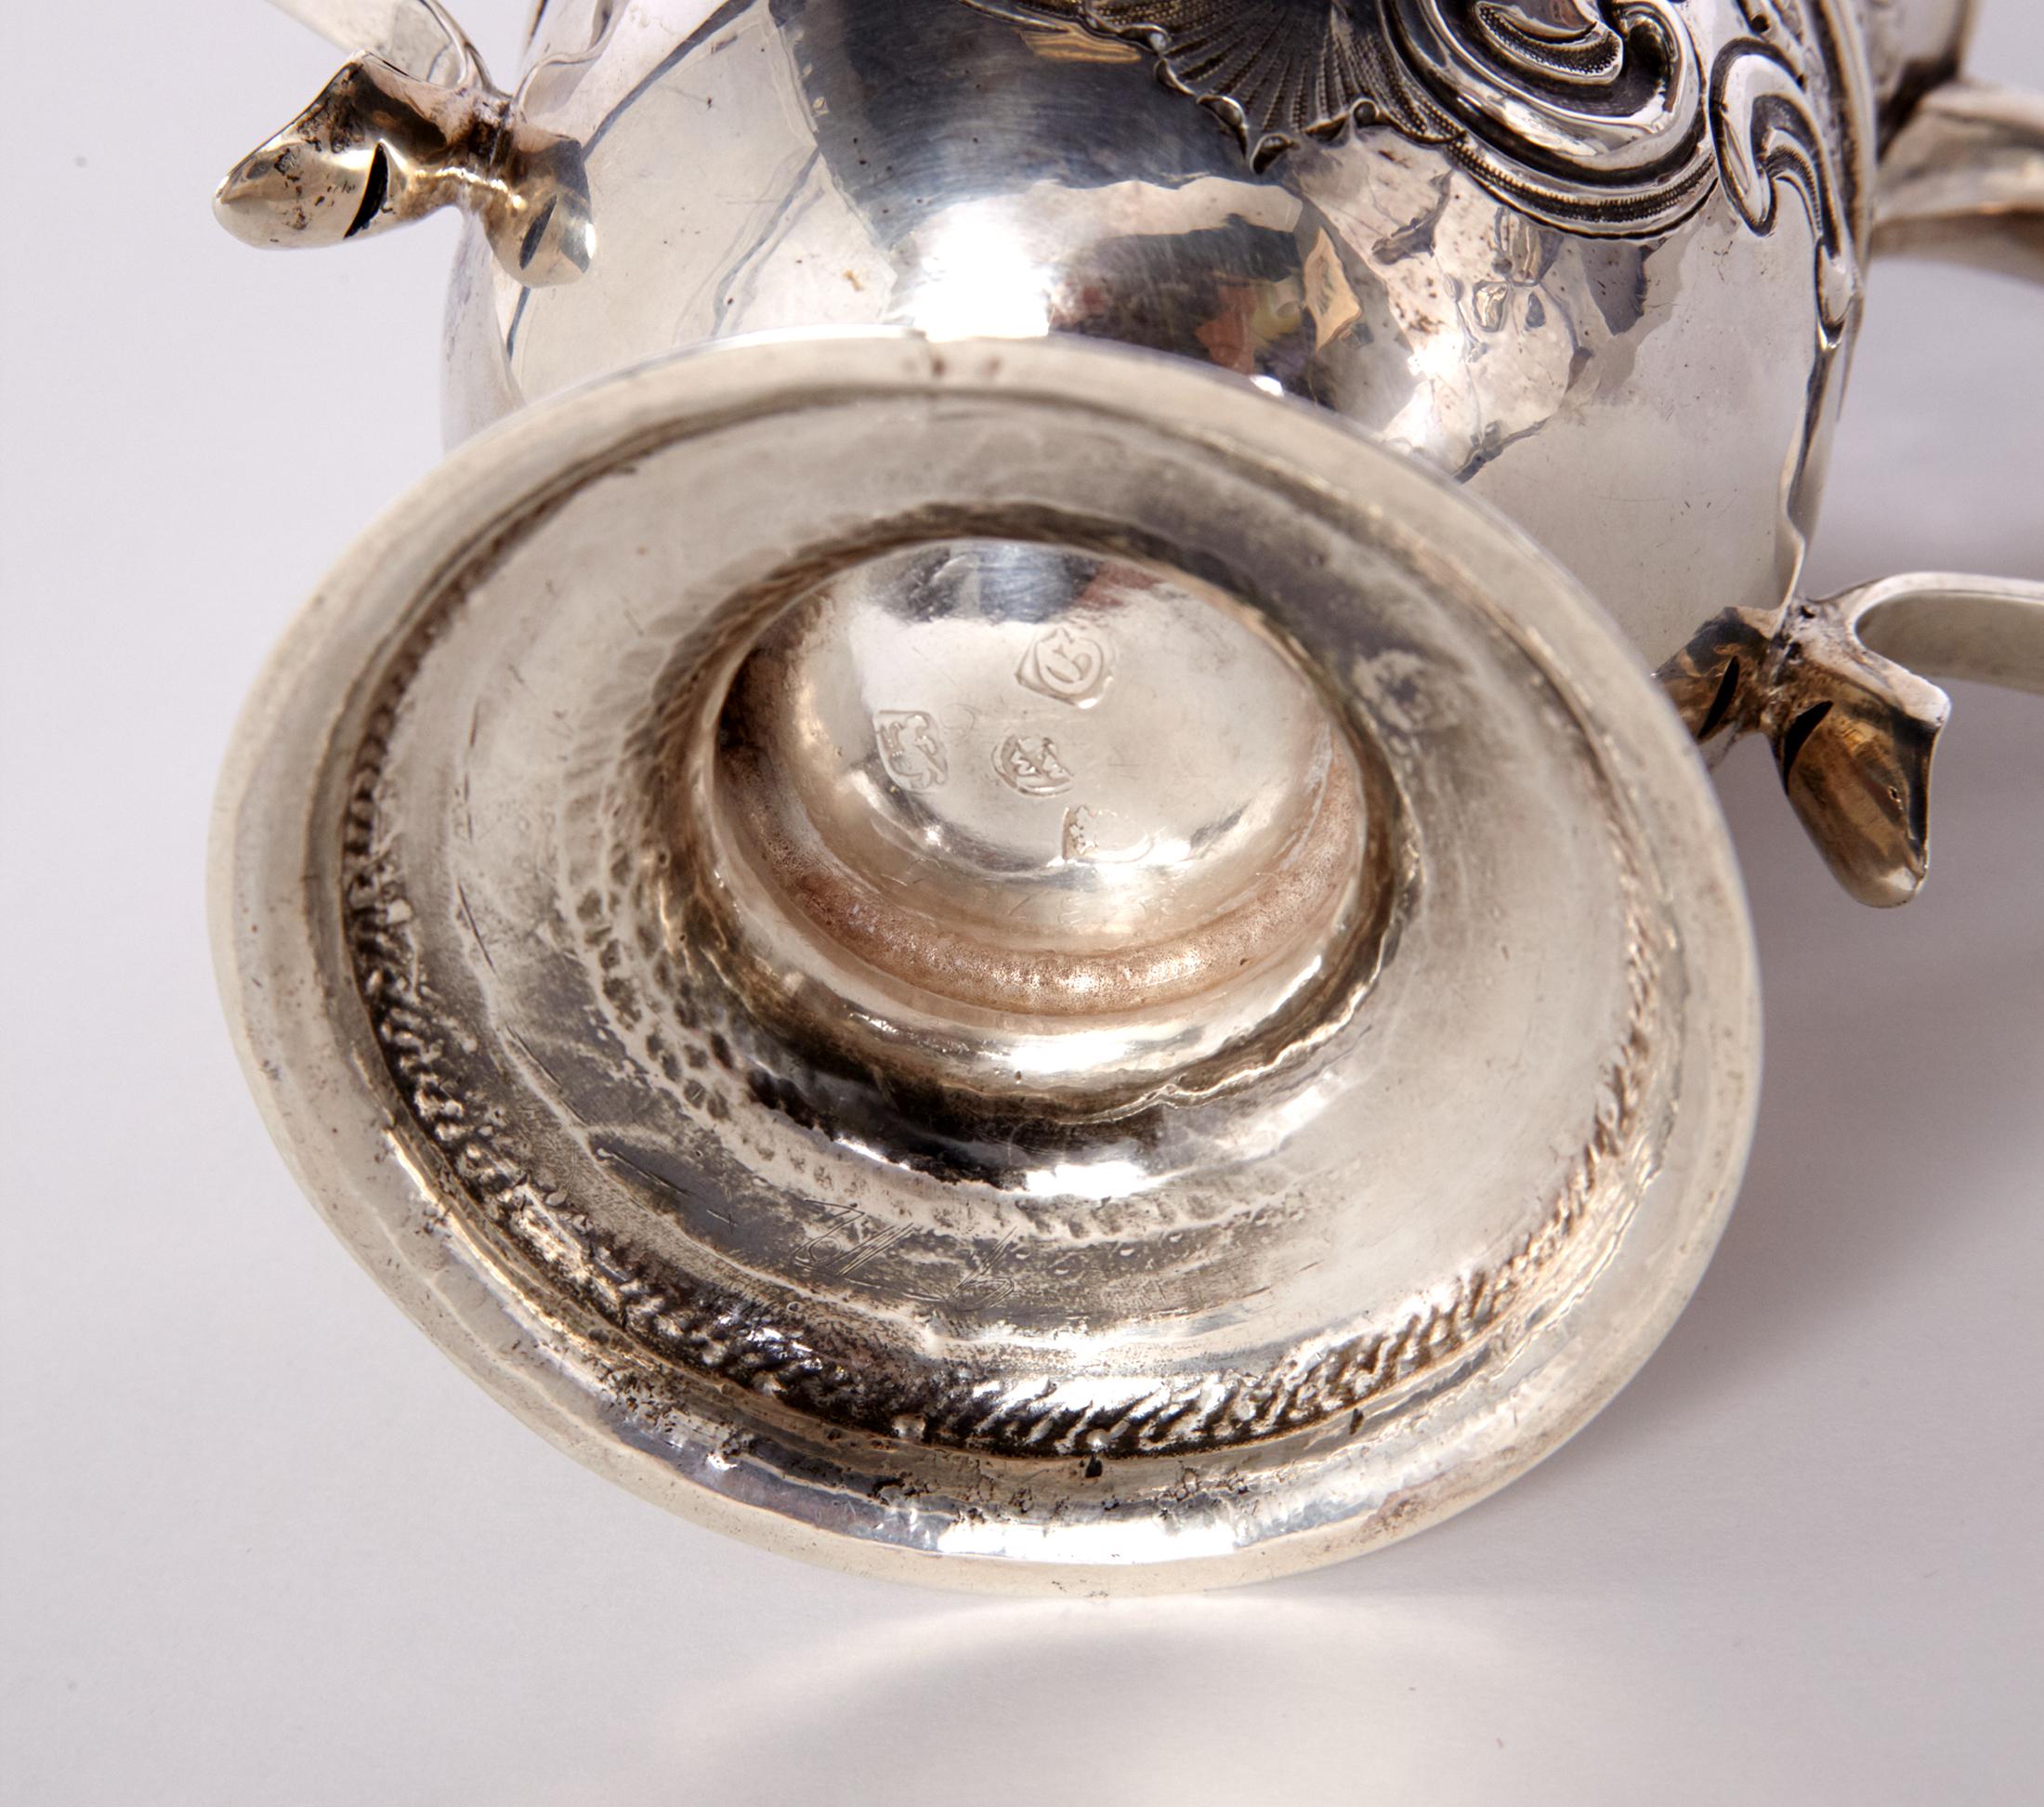 Mid-18th Century Sterling Silver 2-Handled Loving Cup 1762, London by Thomas Whipham